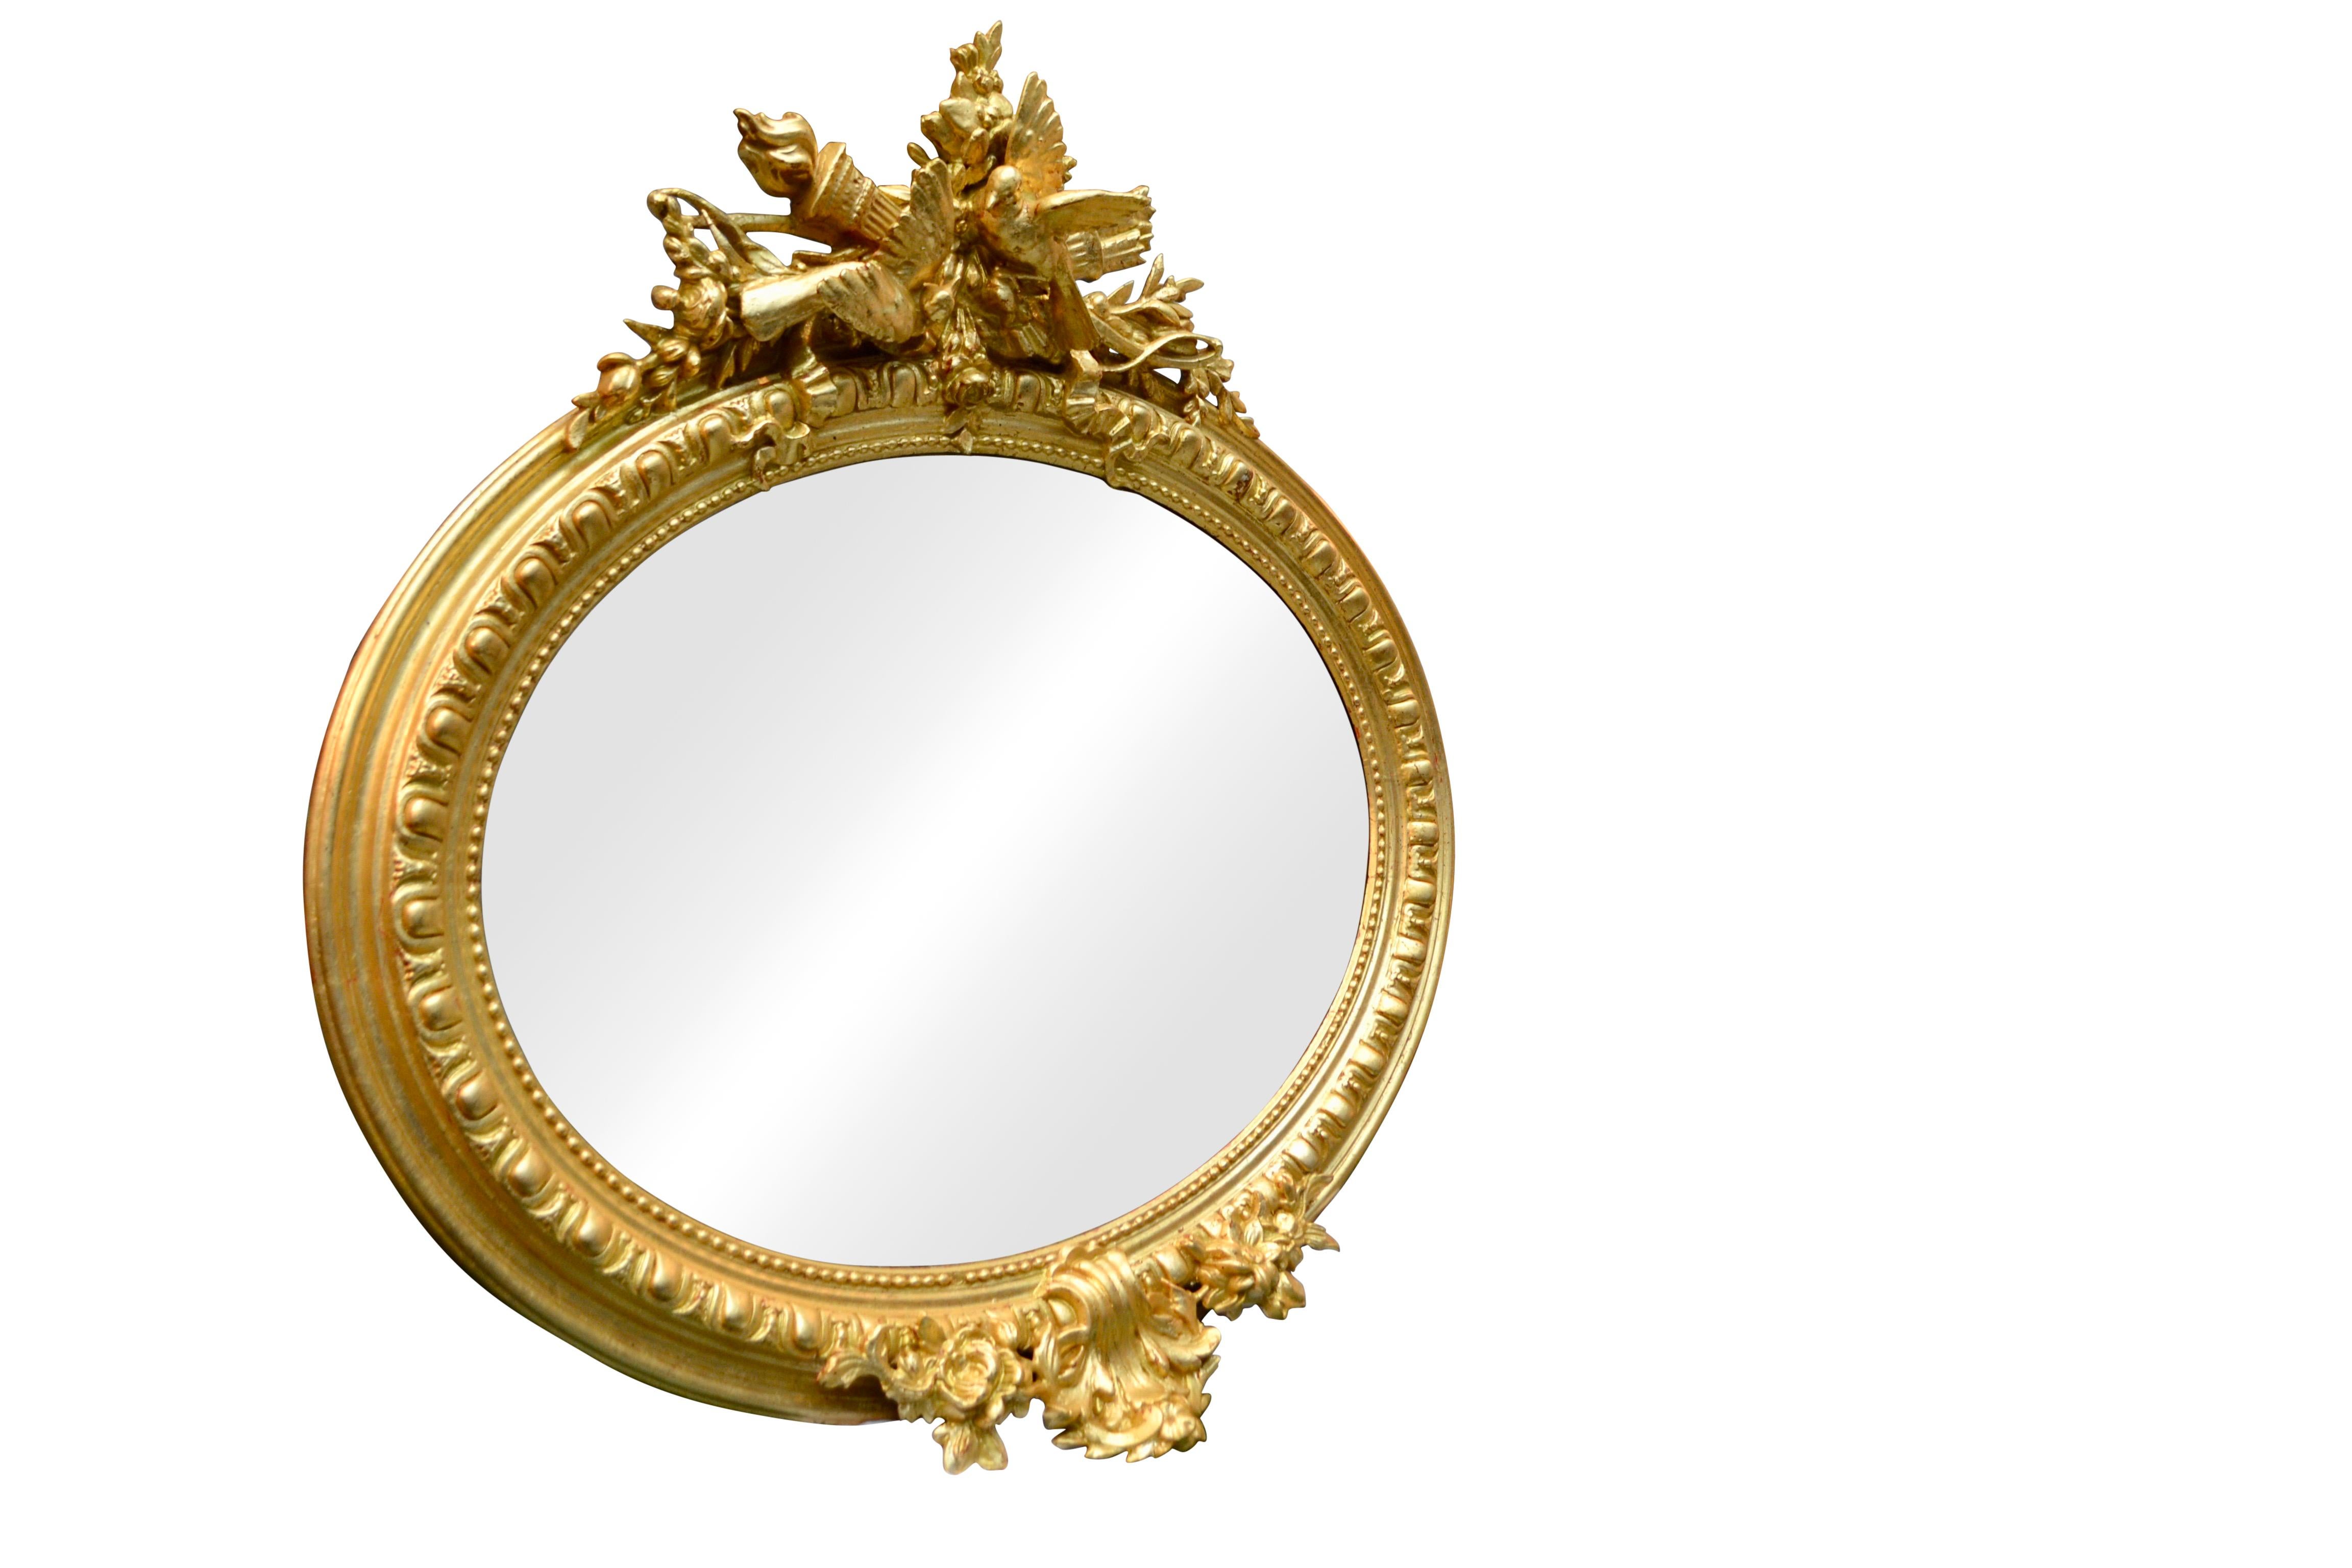 A beautifully carved gilt wood framed oval mirror French, circa 1840, gilt frame carved with an egg and dart design alternating with convex fillets and an inner gilded beaded loop. At the top the frame is decorated by a large cartouche featuring a